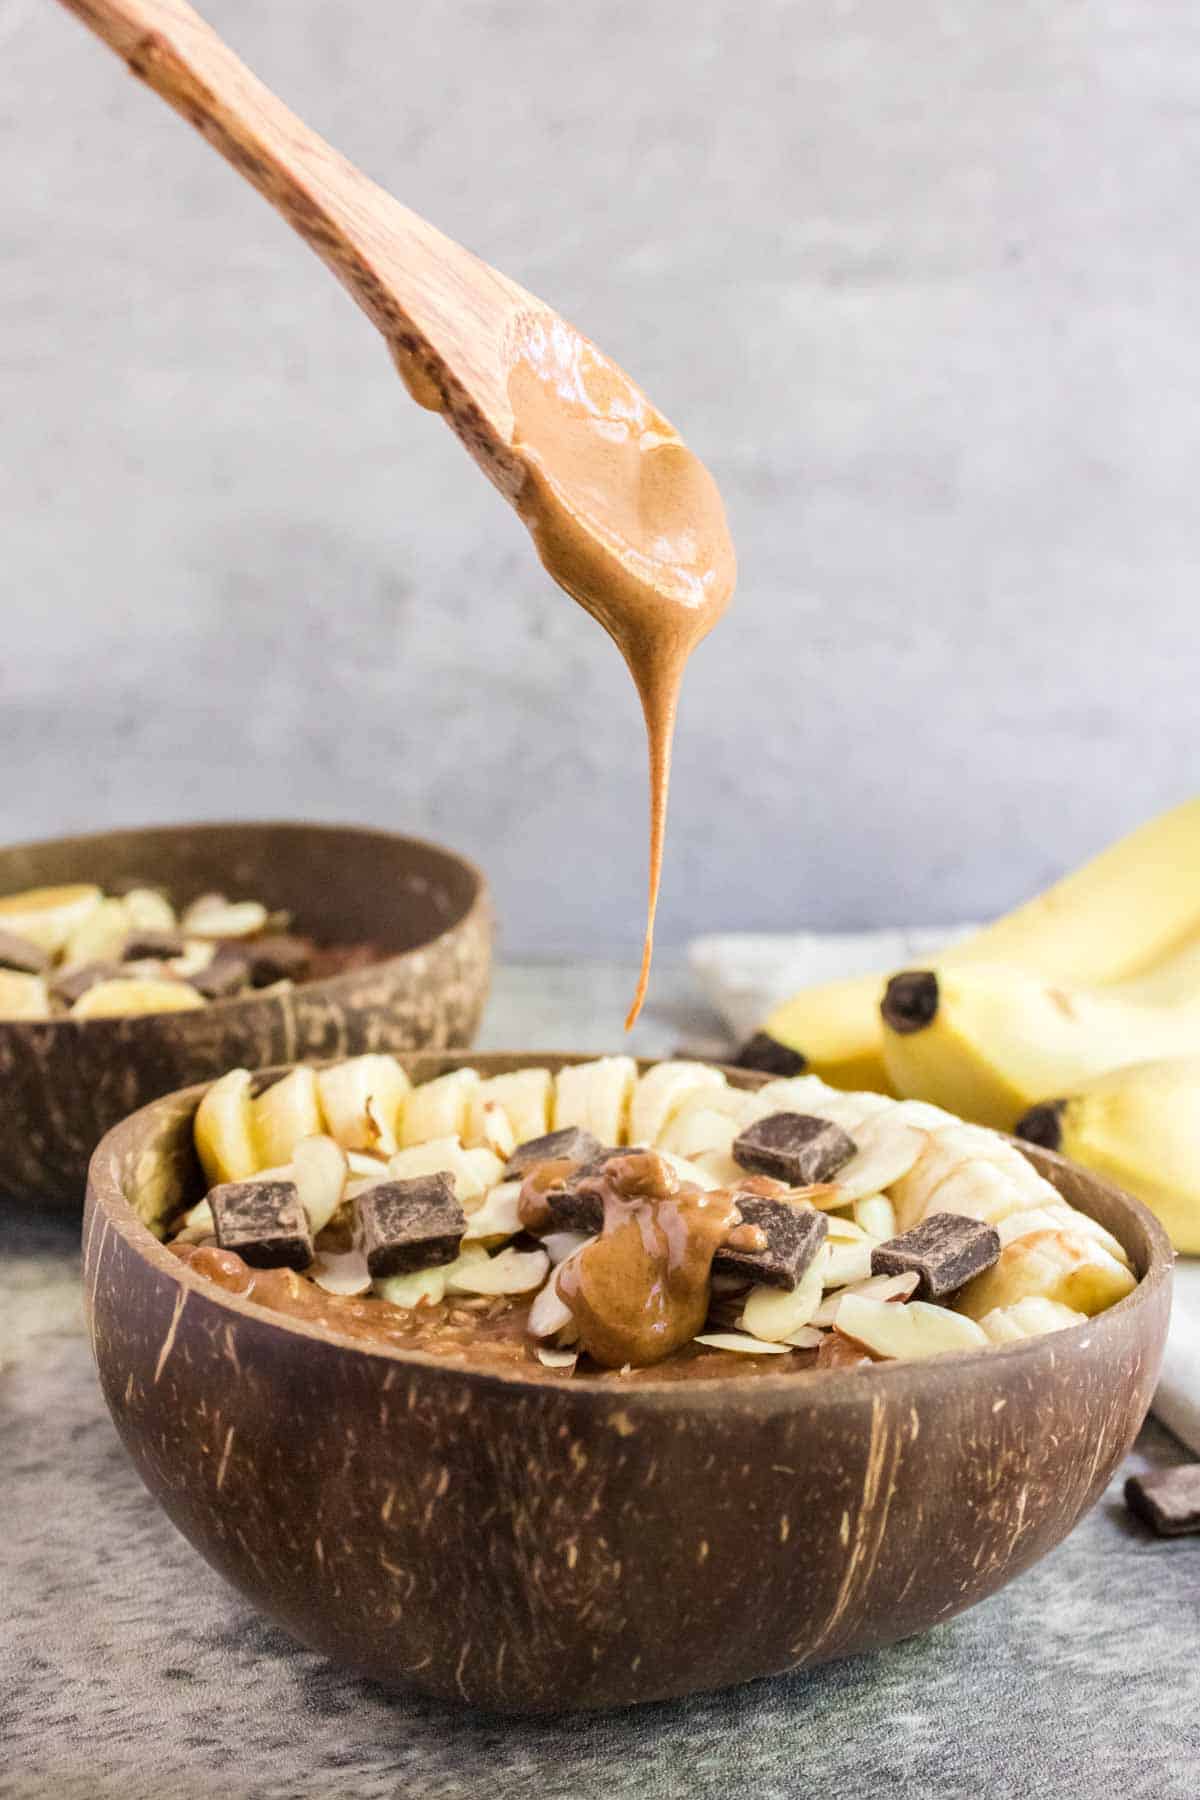 Almond butter being drizzled on top of a bowl of chocolate oatmeal.